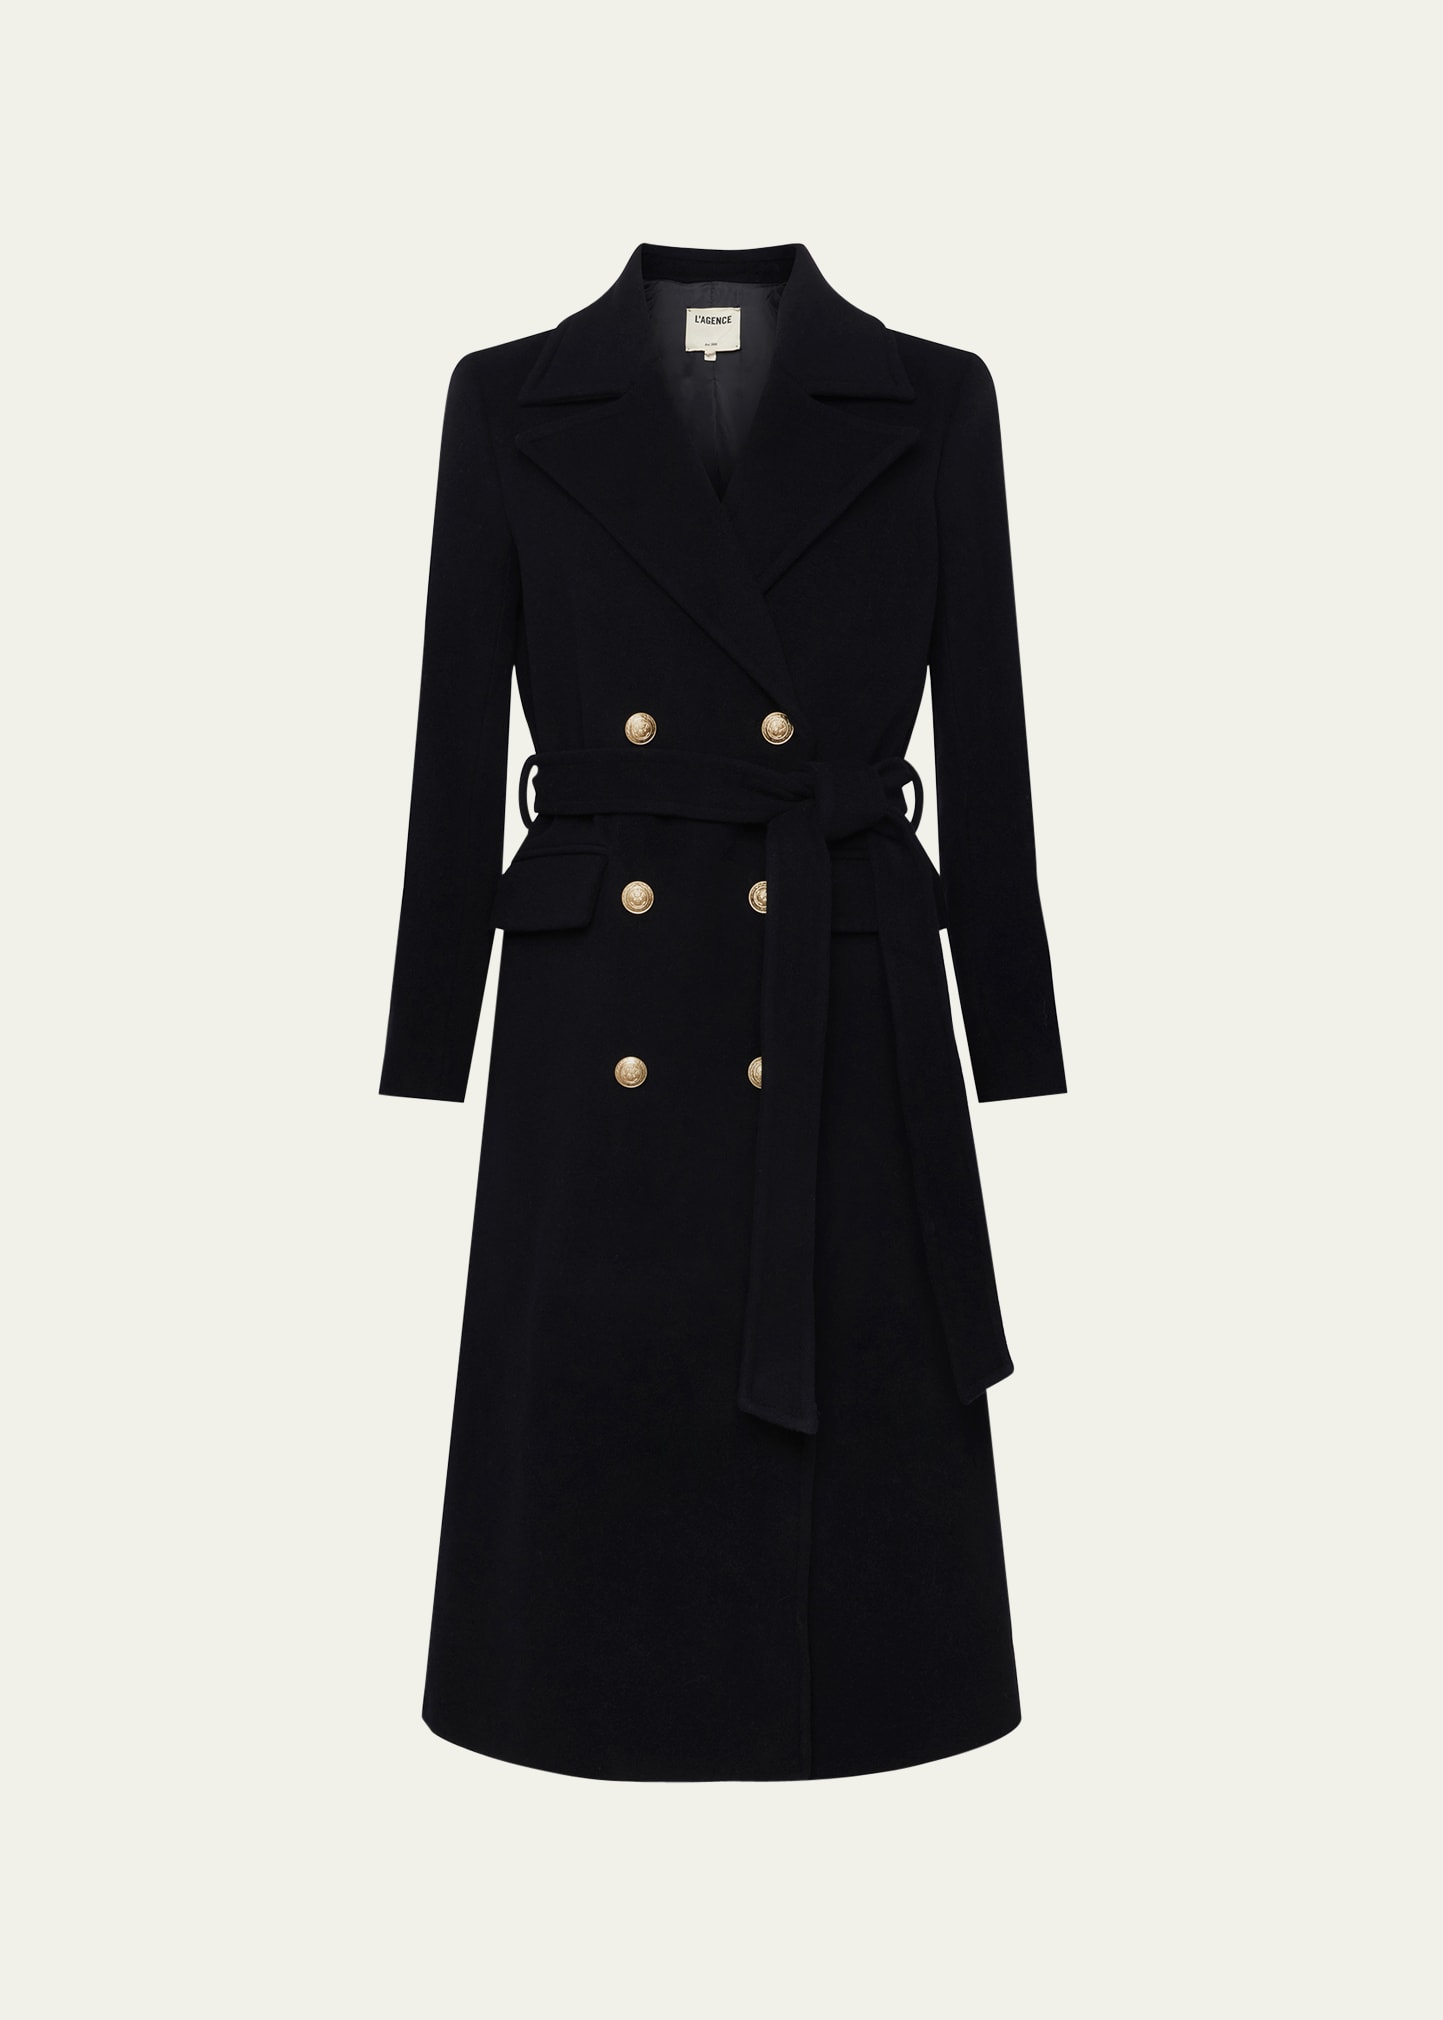 L'Agence Olina Double-Breasted Belted Coat | Bergdorf Goodman